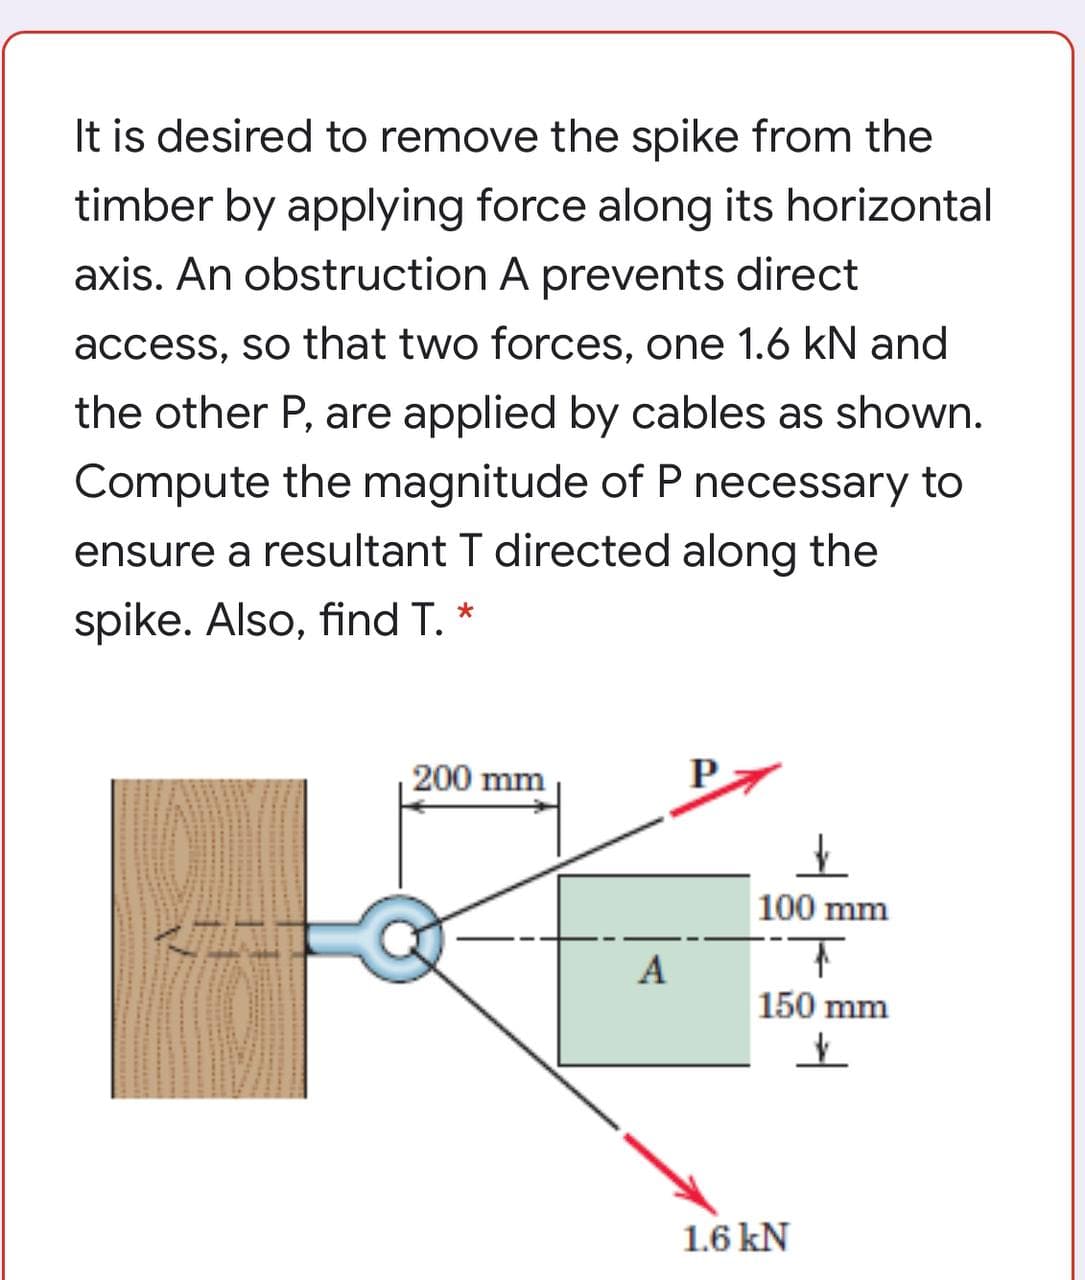 It is desired to remove the spike from the
timber by applying force along its horizontal
axis. An obstruction A prevents direct
access, so that two forces, one 1.6 kN and
the other P, are applied by cables as shown.
Compute the magnitude of P necessary to
ensure a resultant T directed along the
spike. Also, find T. *
200 mm
100 mm
A
150 mm
1.6 kN
